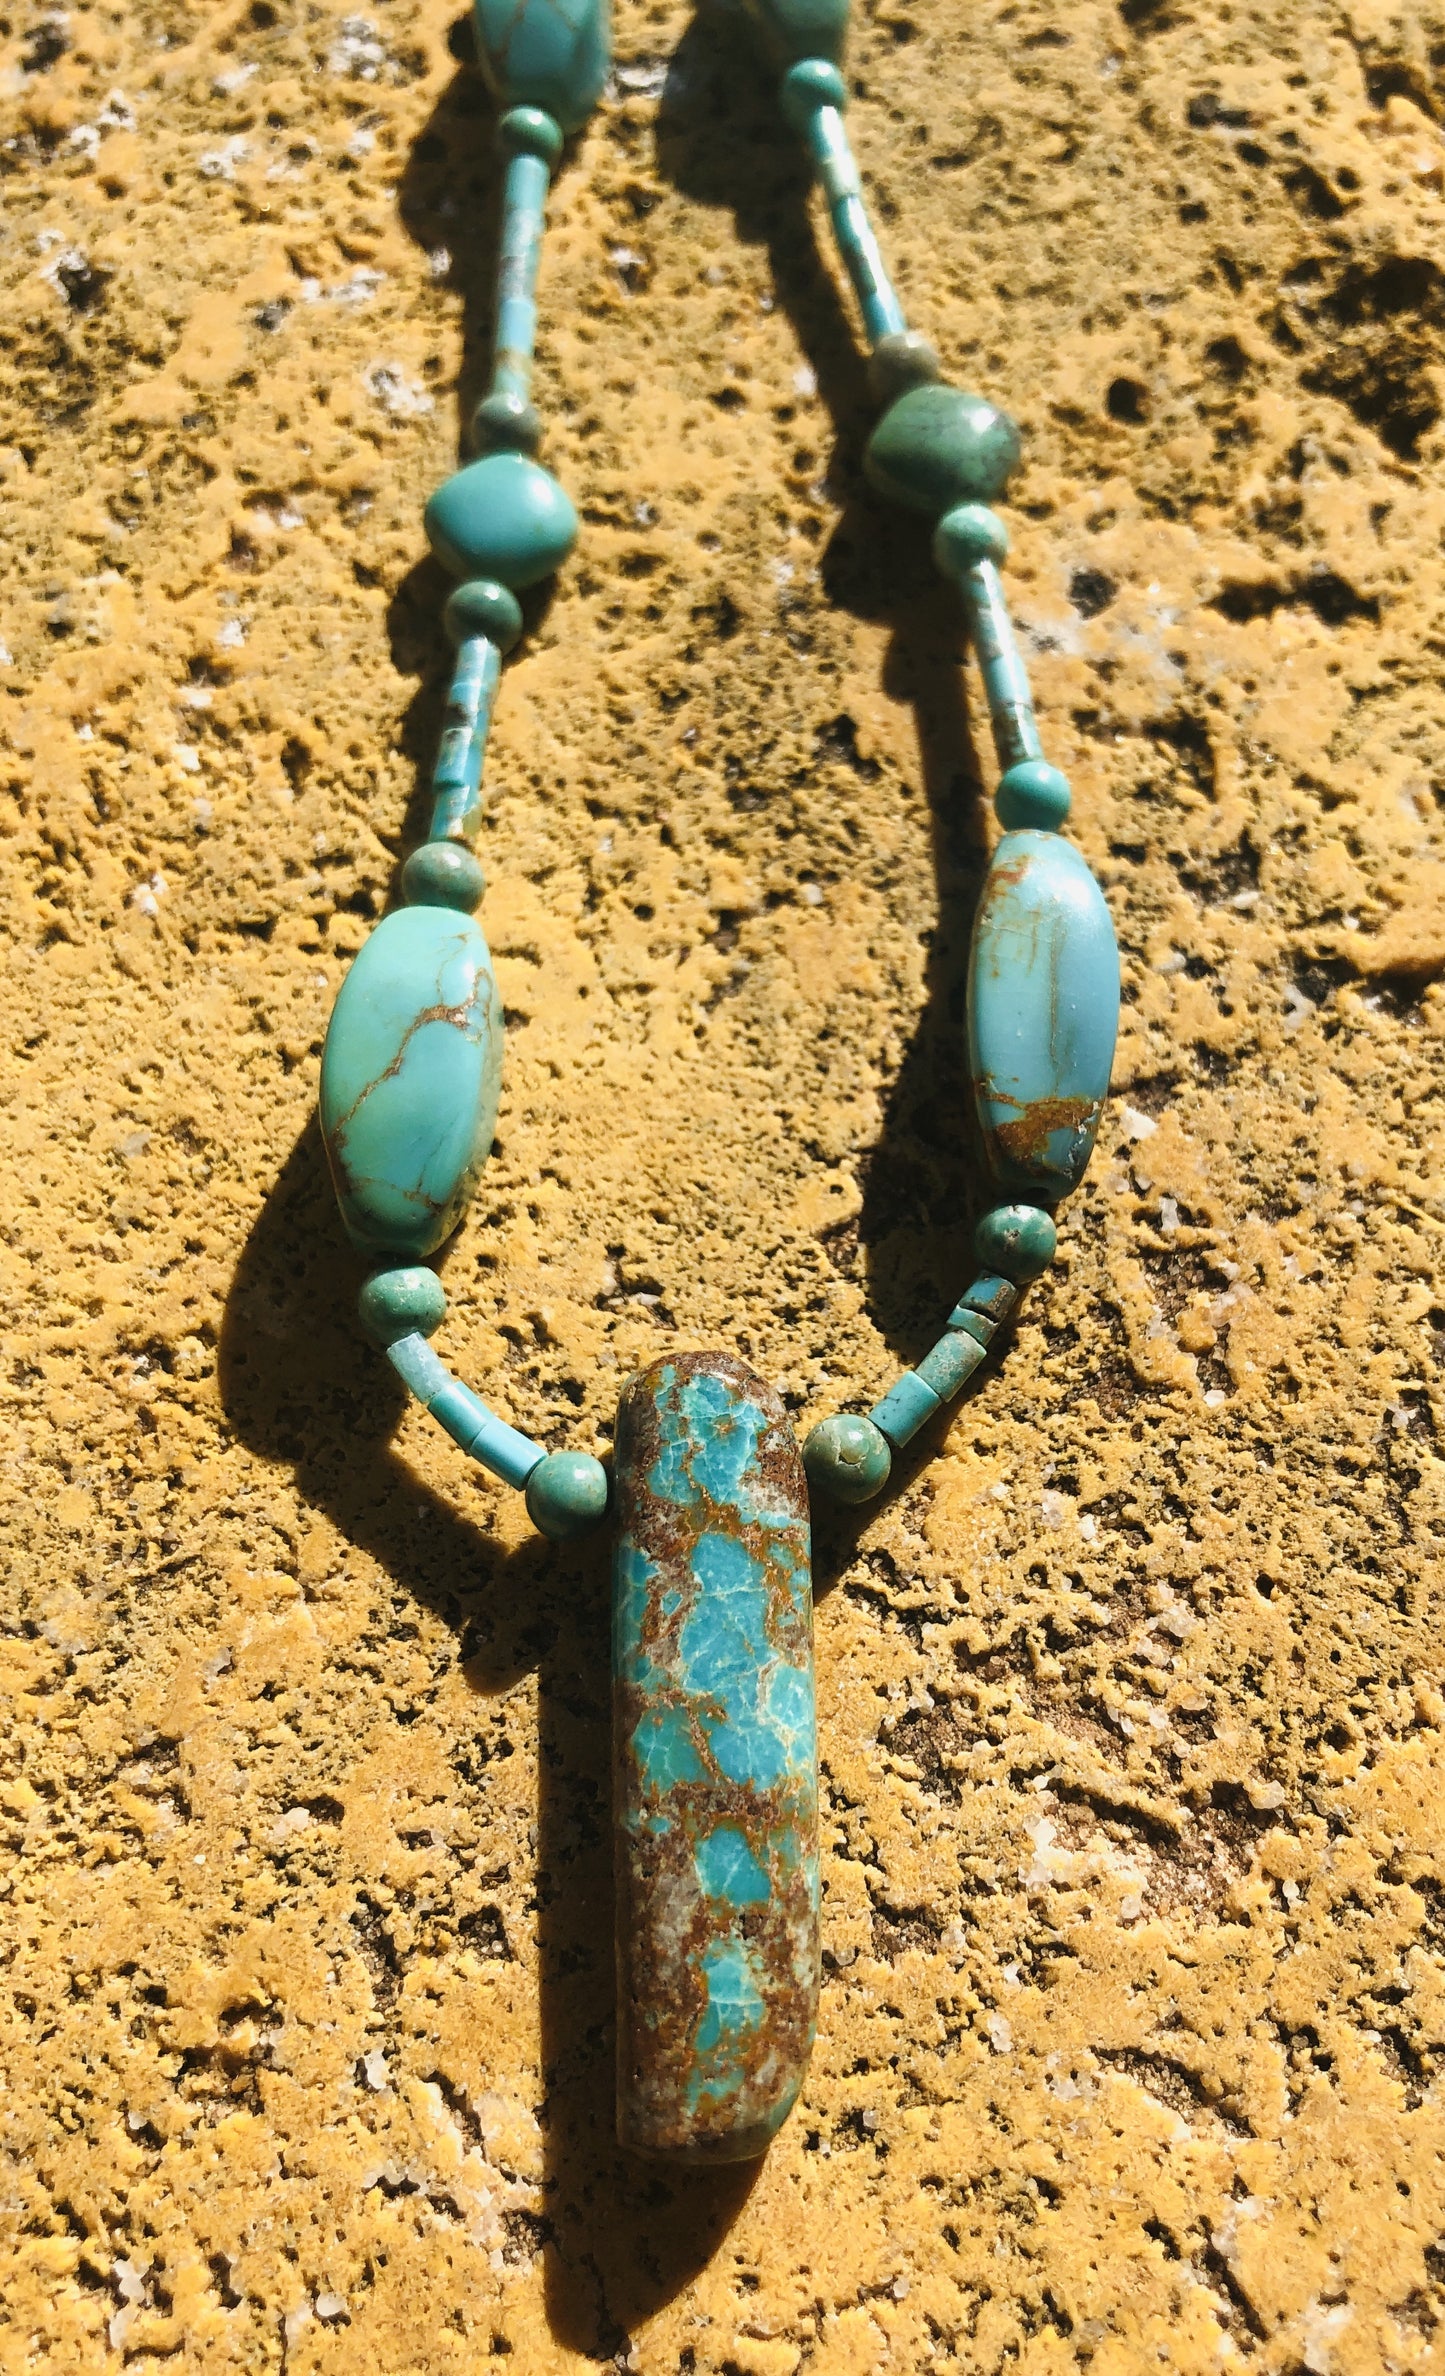 Natural Turquoise Necklaces